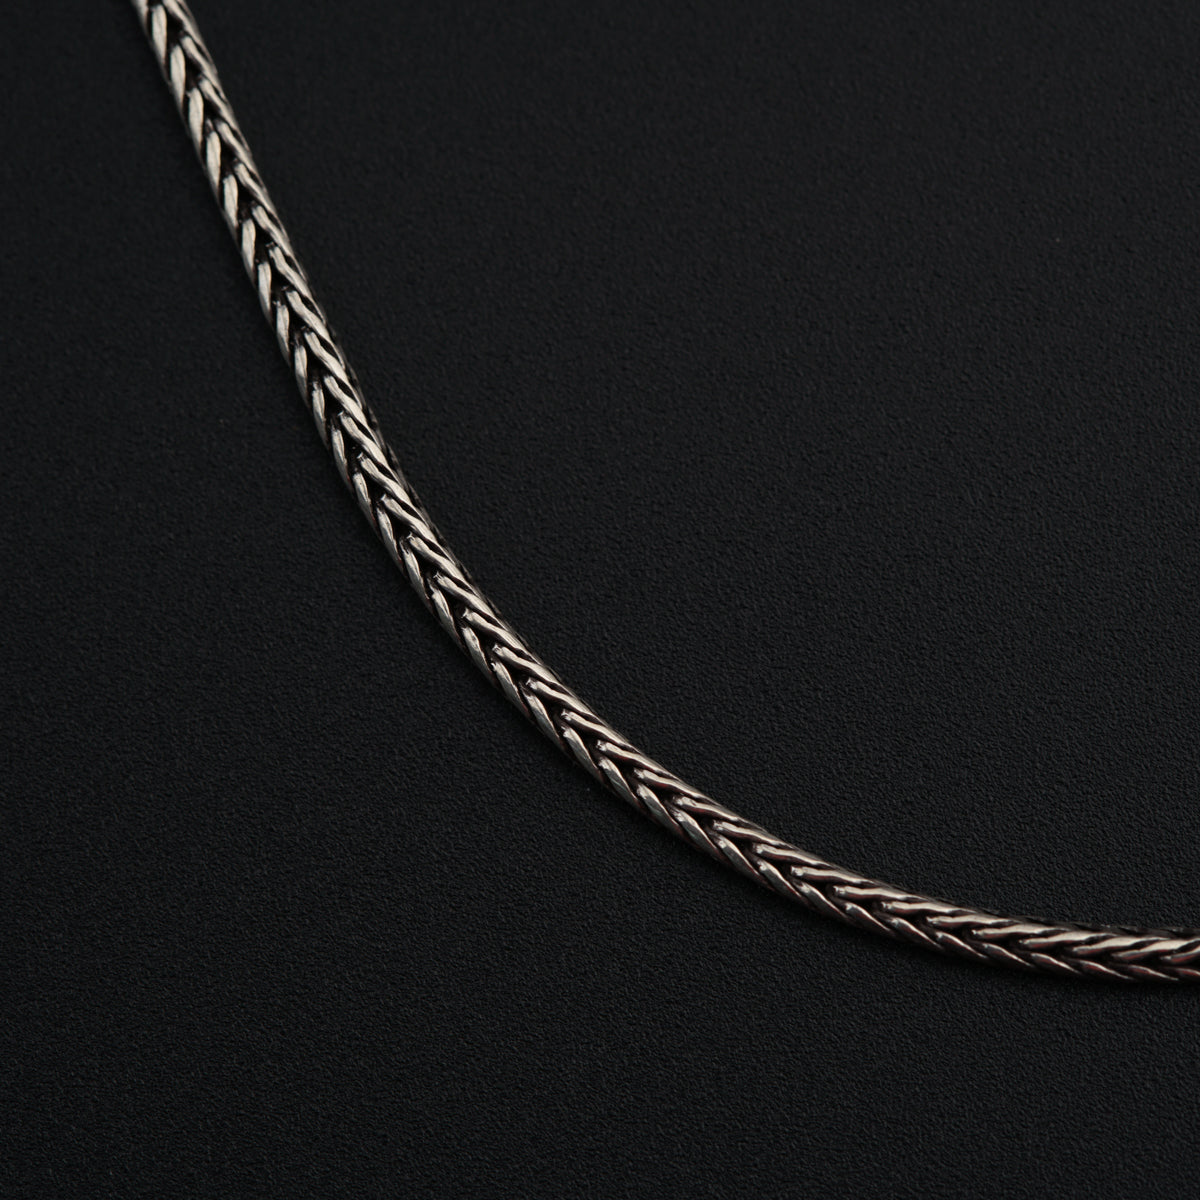 Silver Chain for Men / Women - 16 inches